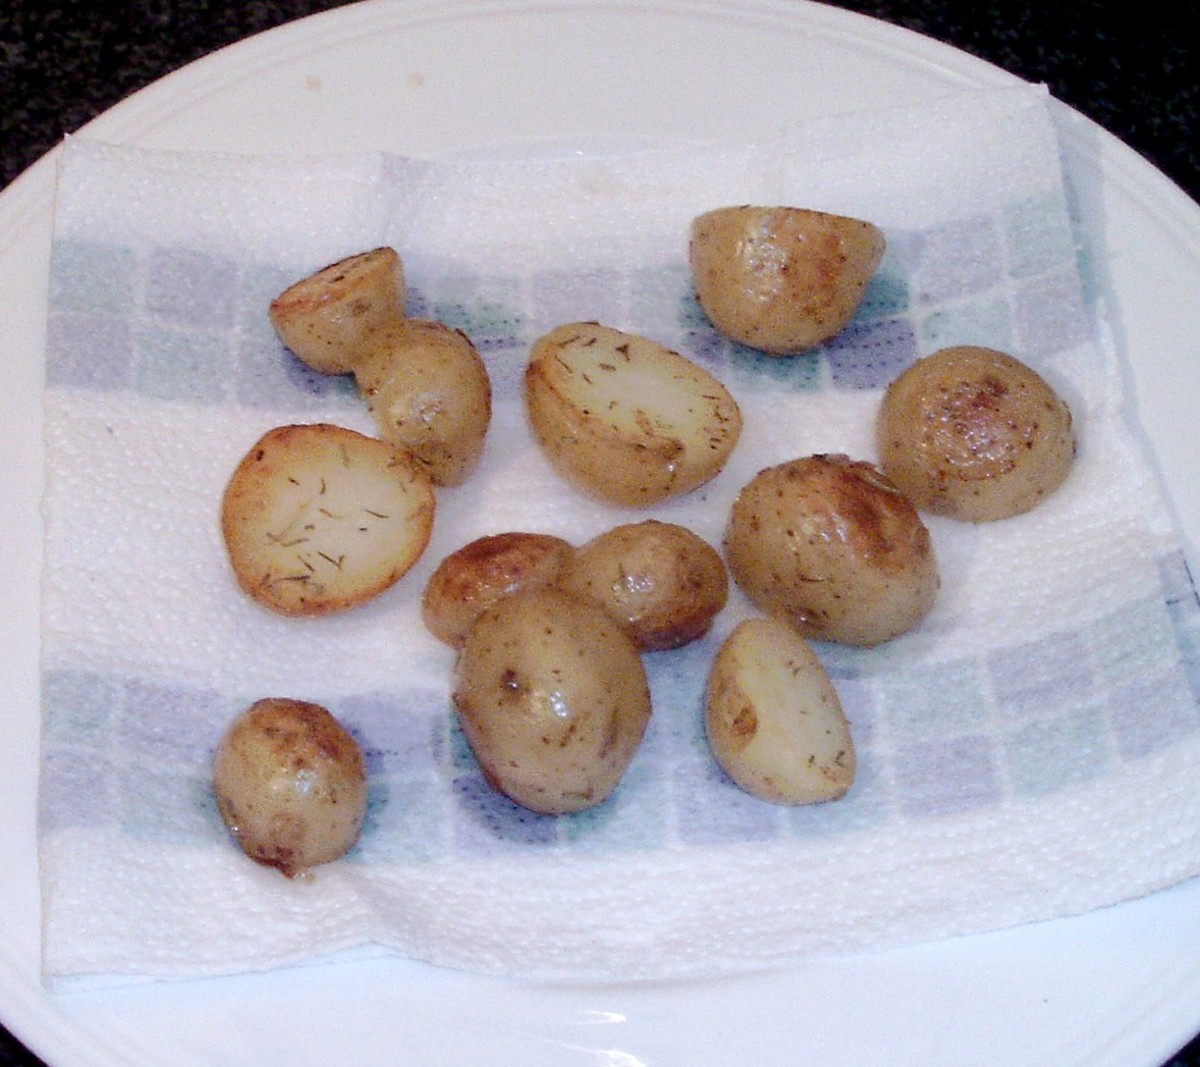 Herb and garlic roasted potatoes are drained on kitchen paper